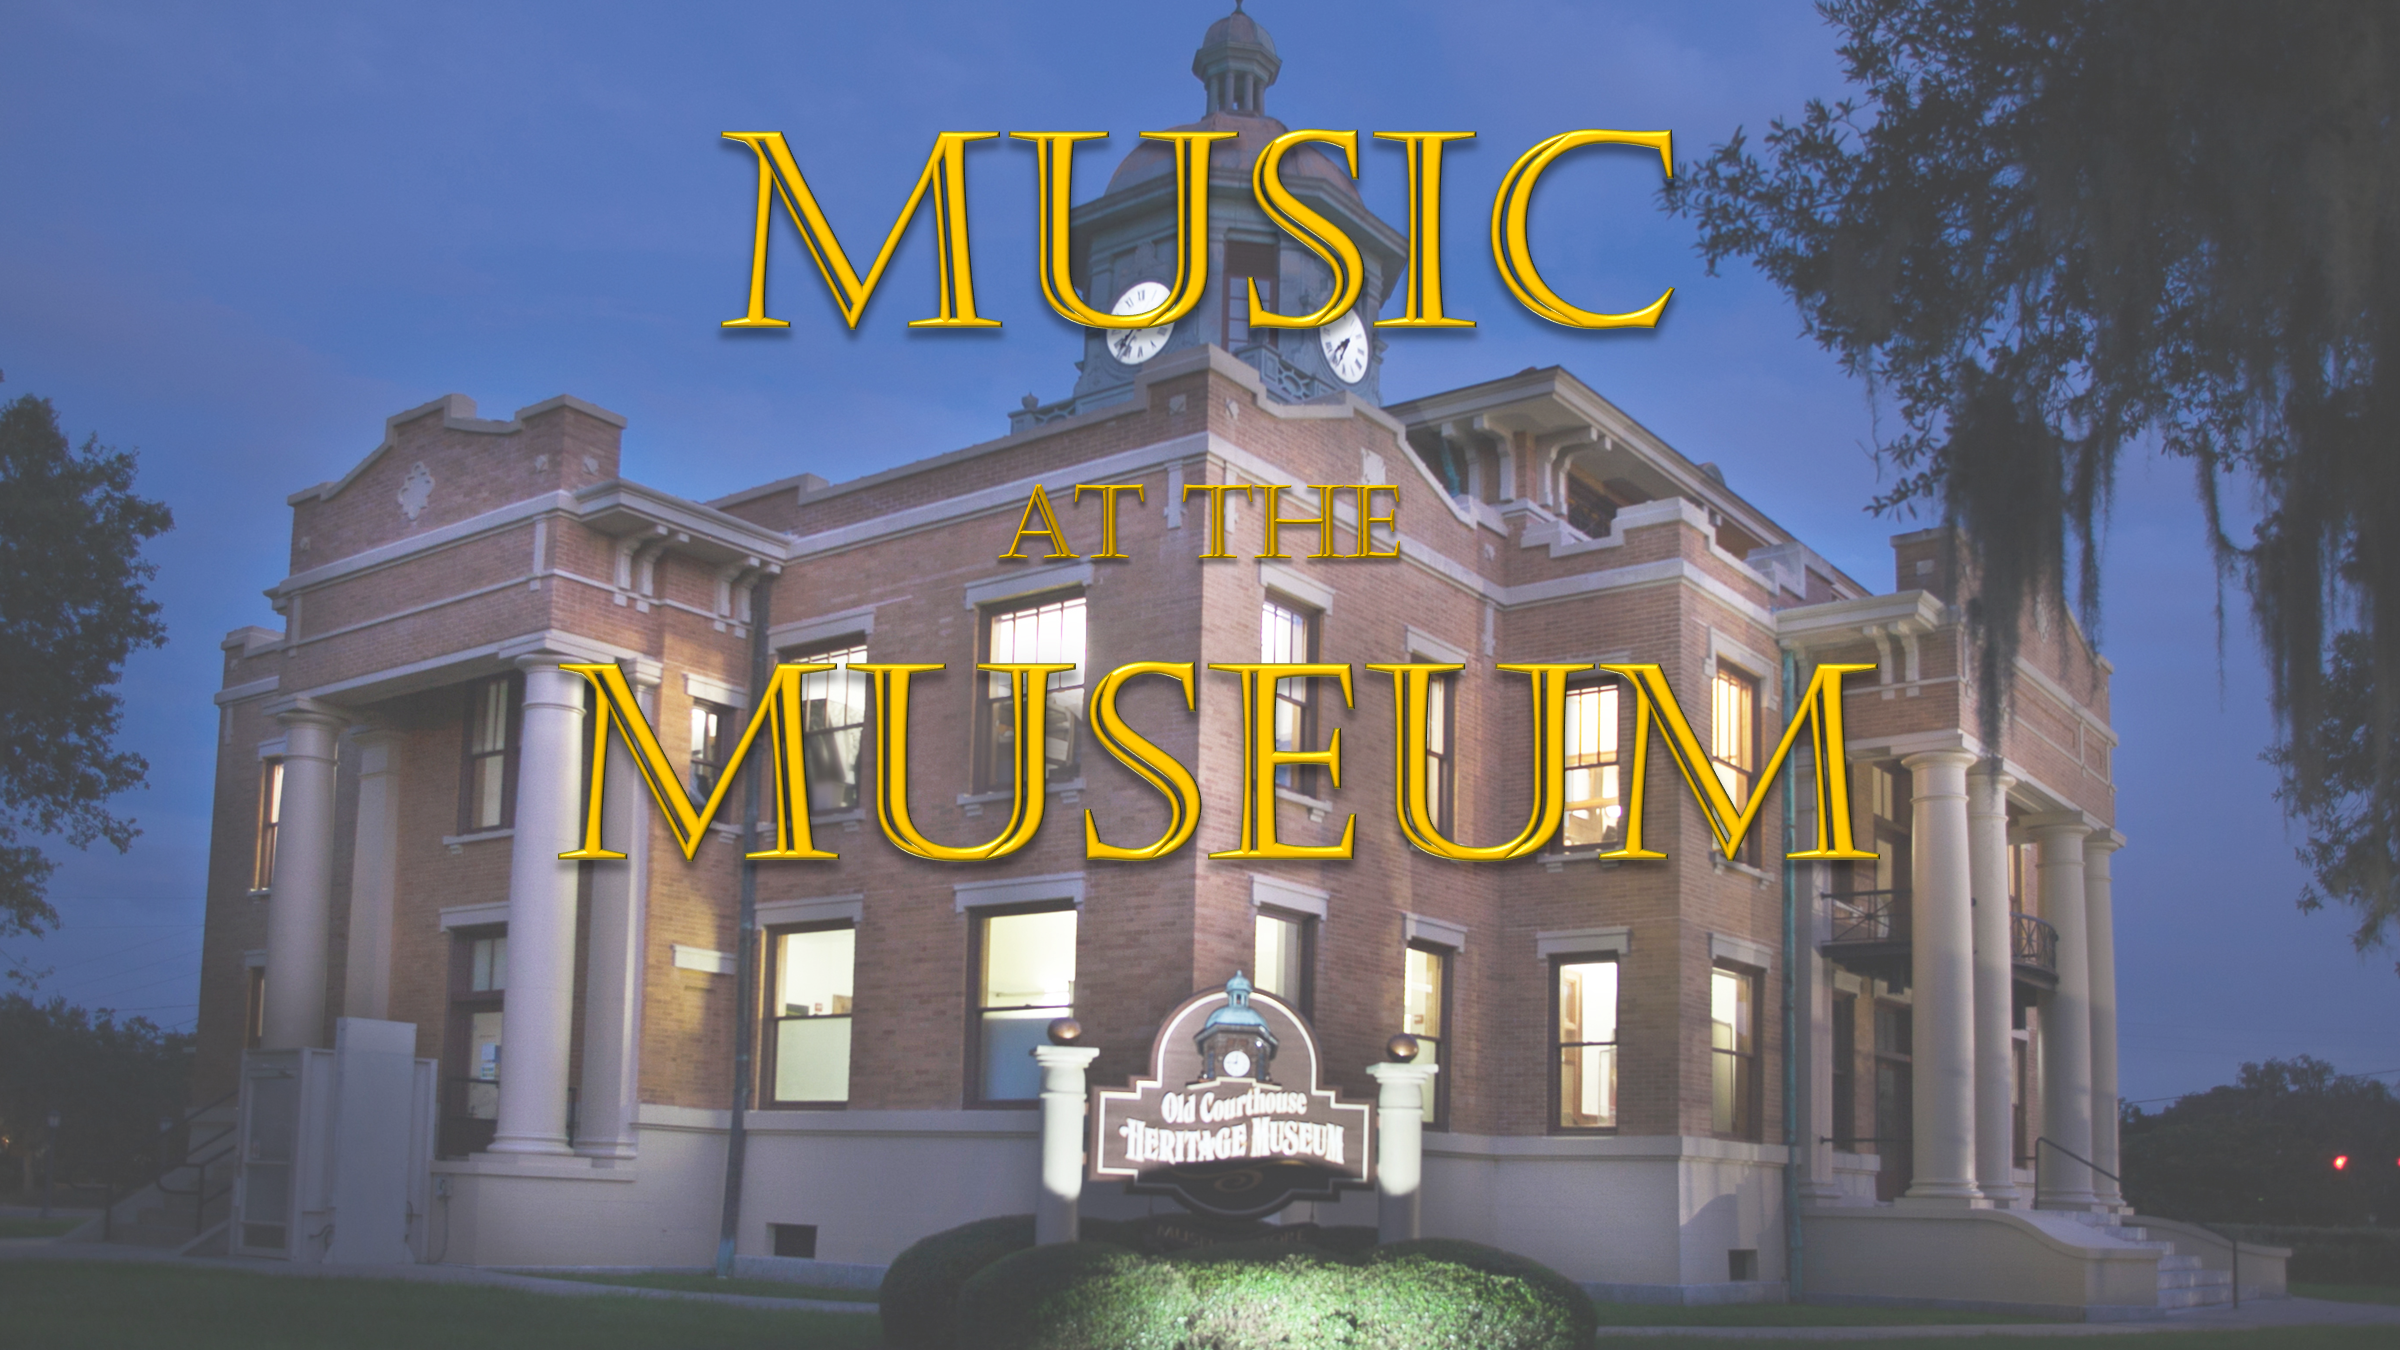 Featured image to advertise for the Music at the Museum concert series, showing the courthouse lit up at night.